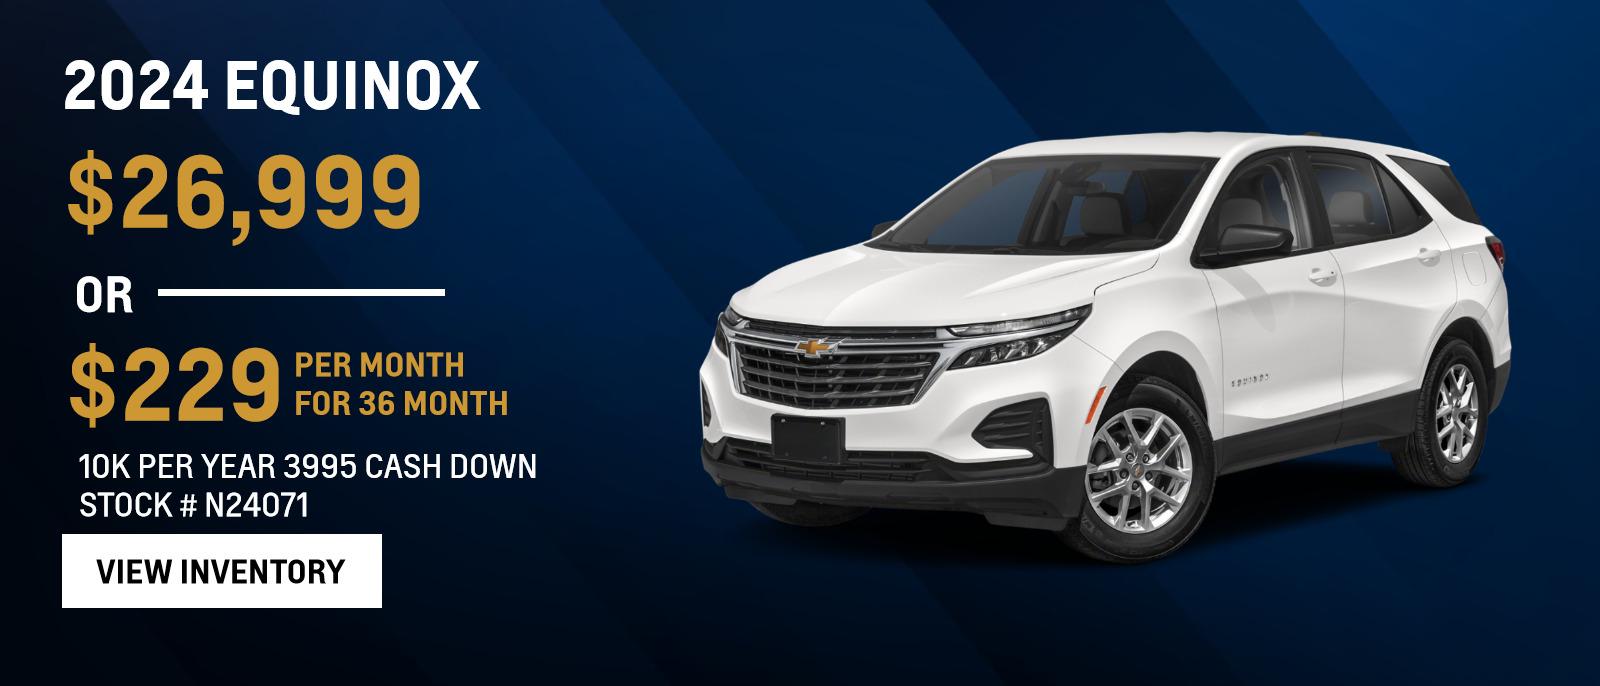 2024 Equinox
$26,999 or Lease for $229 per month for 36 month lease
10K per year 3995 cash down
Stock # N24071